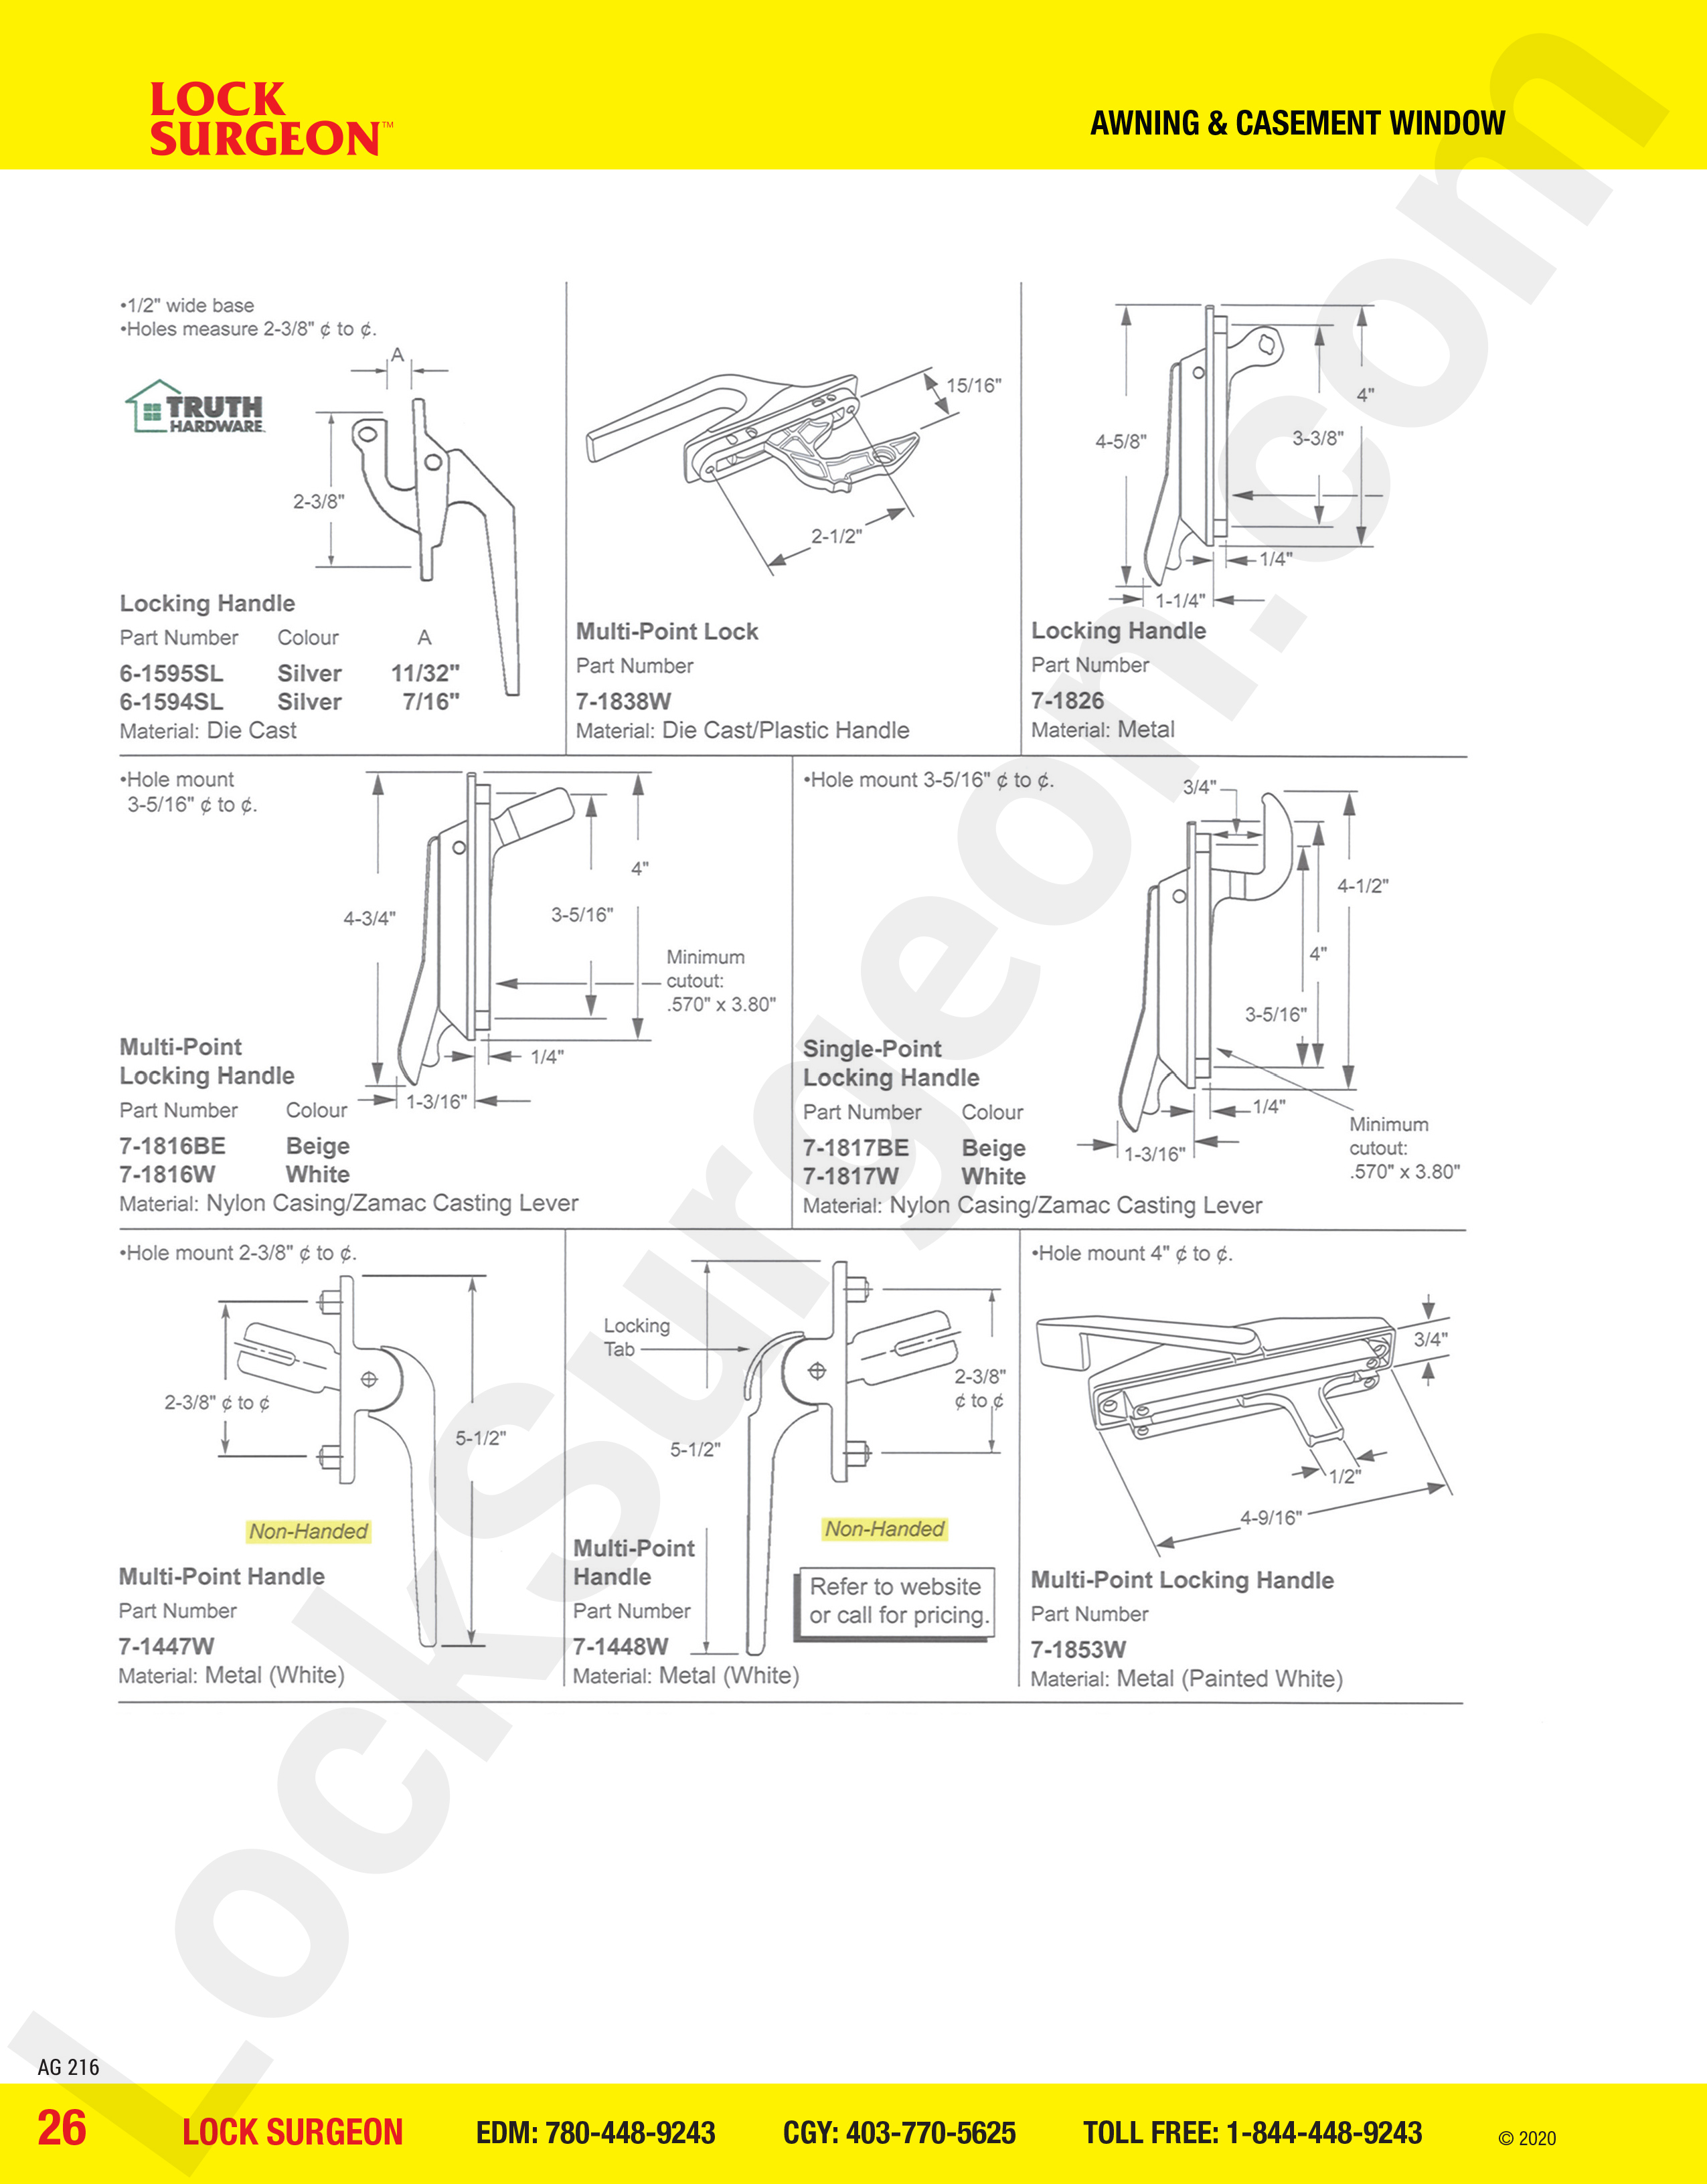 awning and casement window parts for locking handles, multi-point lock, single-point locking handle.